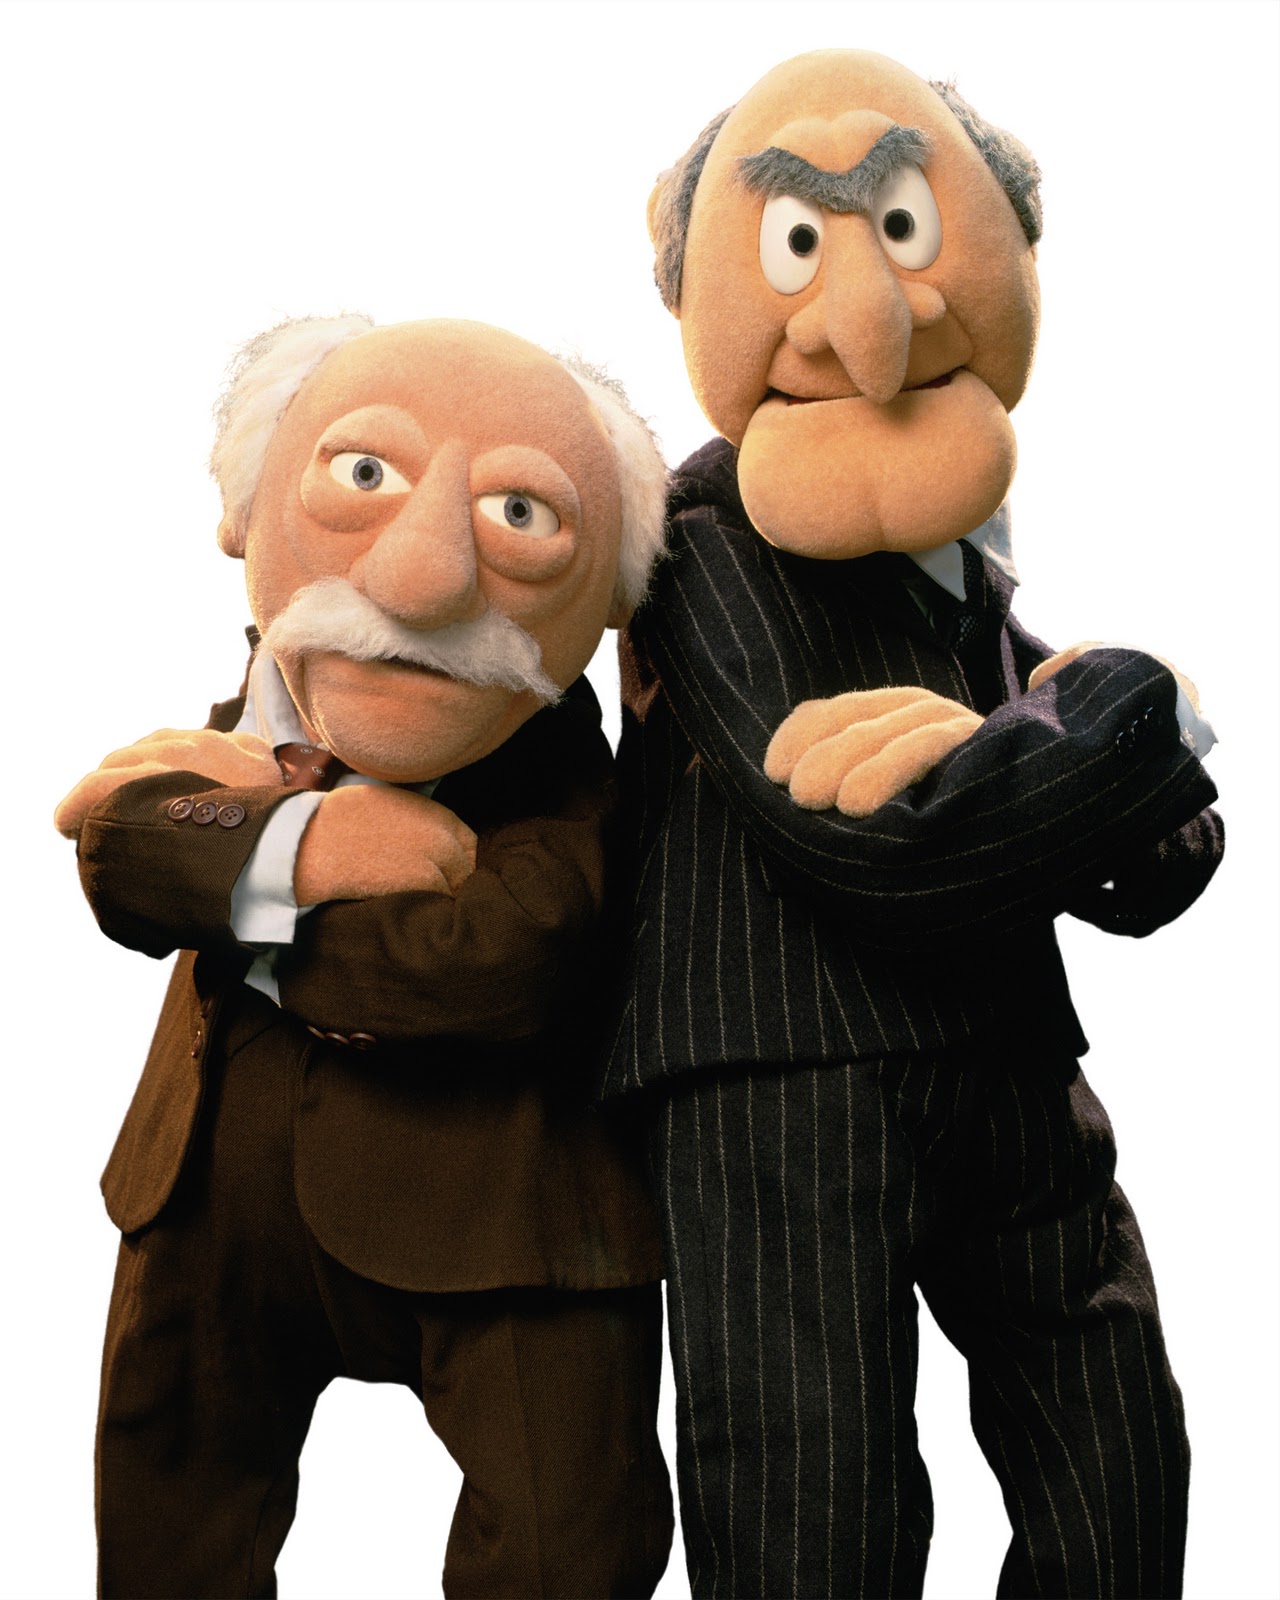 Muppets Statler And Waldorf Quotes. QuotesGram